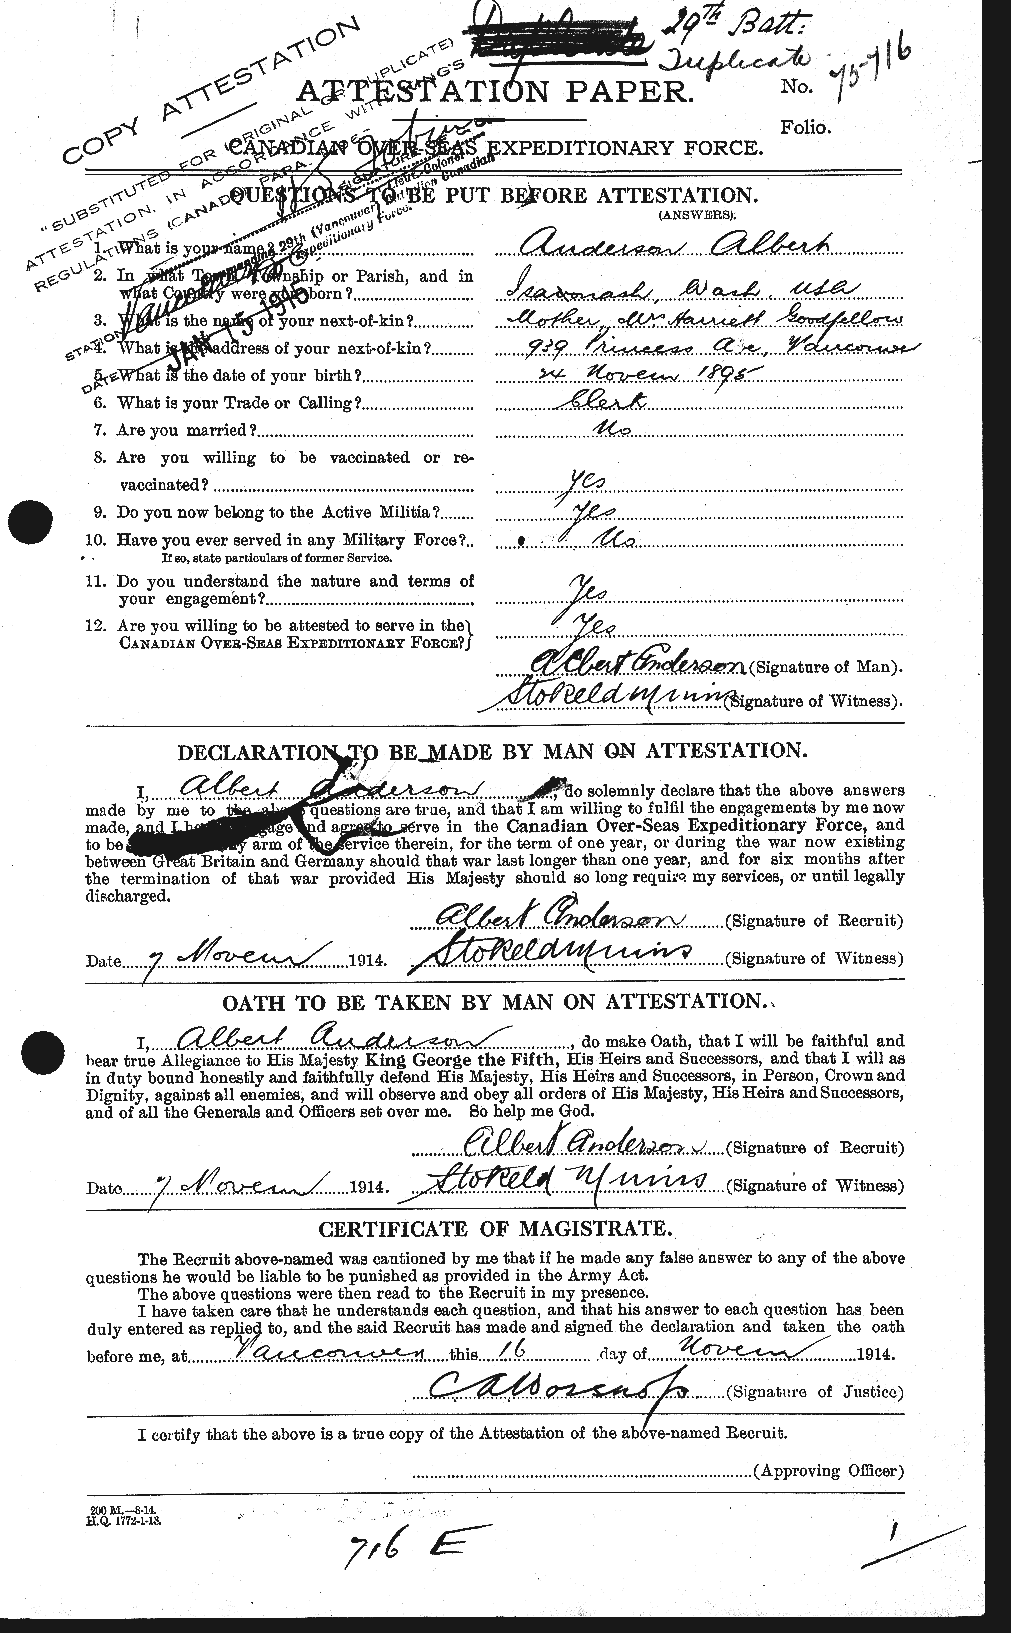 Personnel Records of the First World War - CEF 209557a